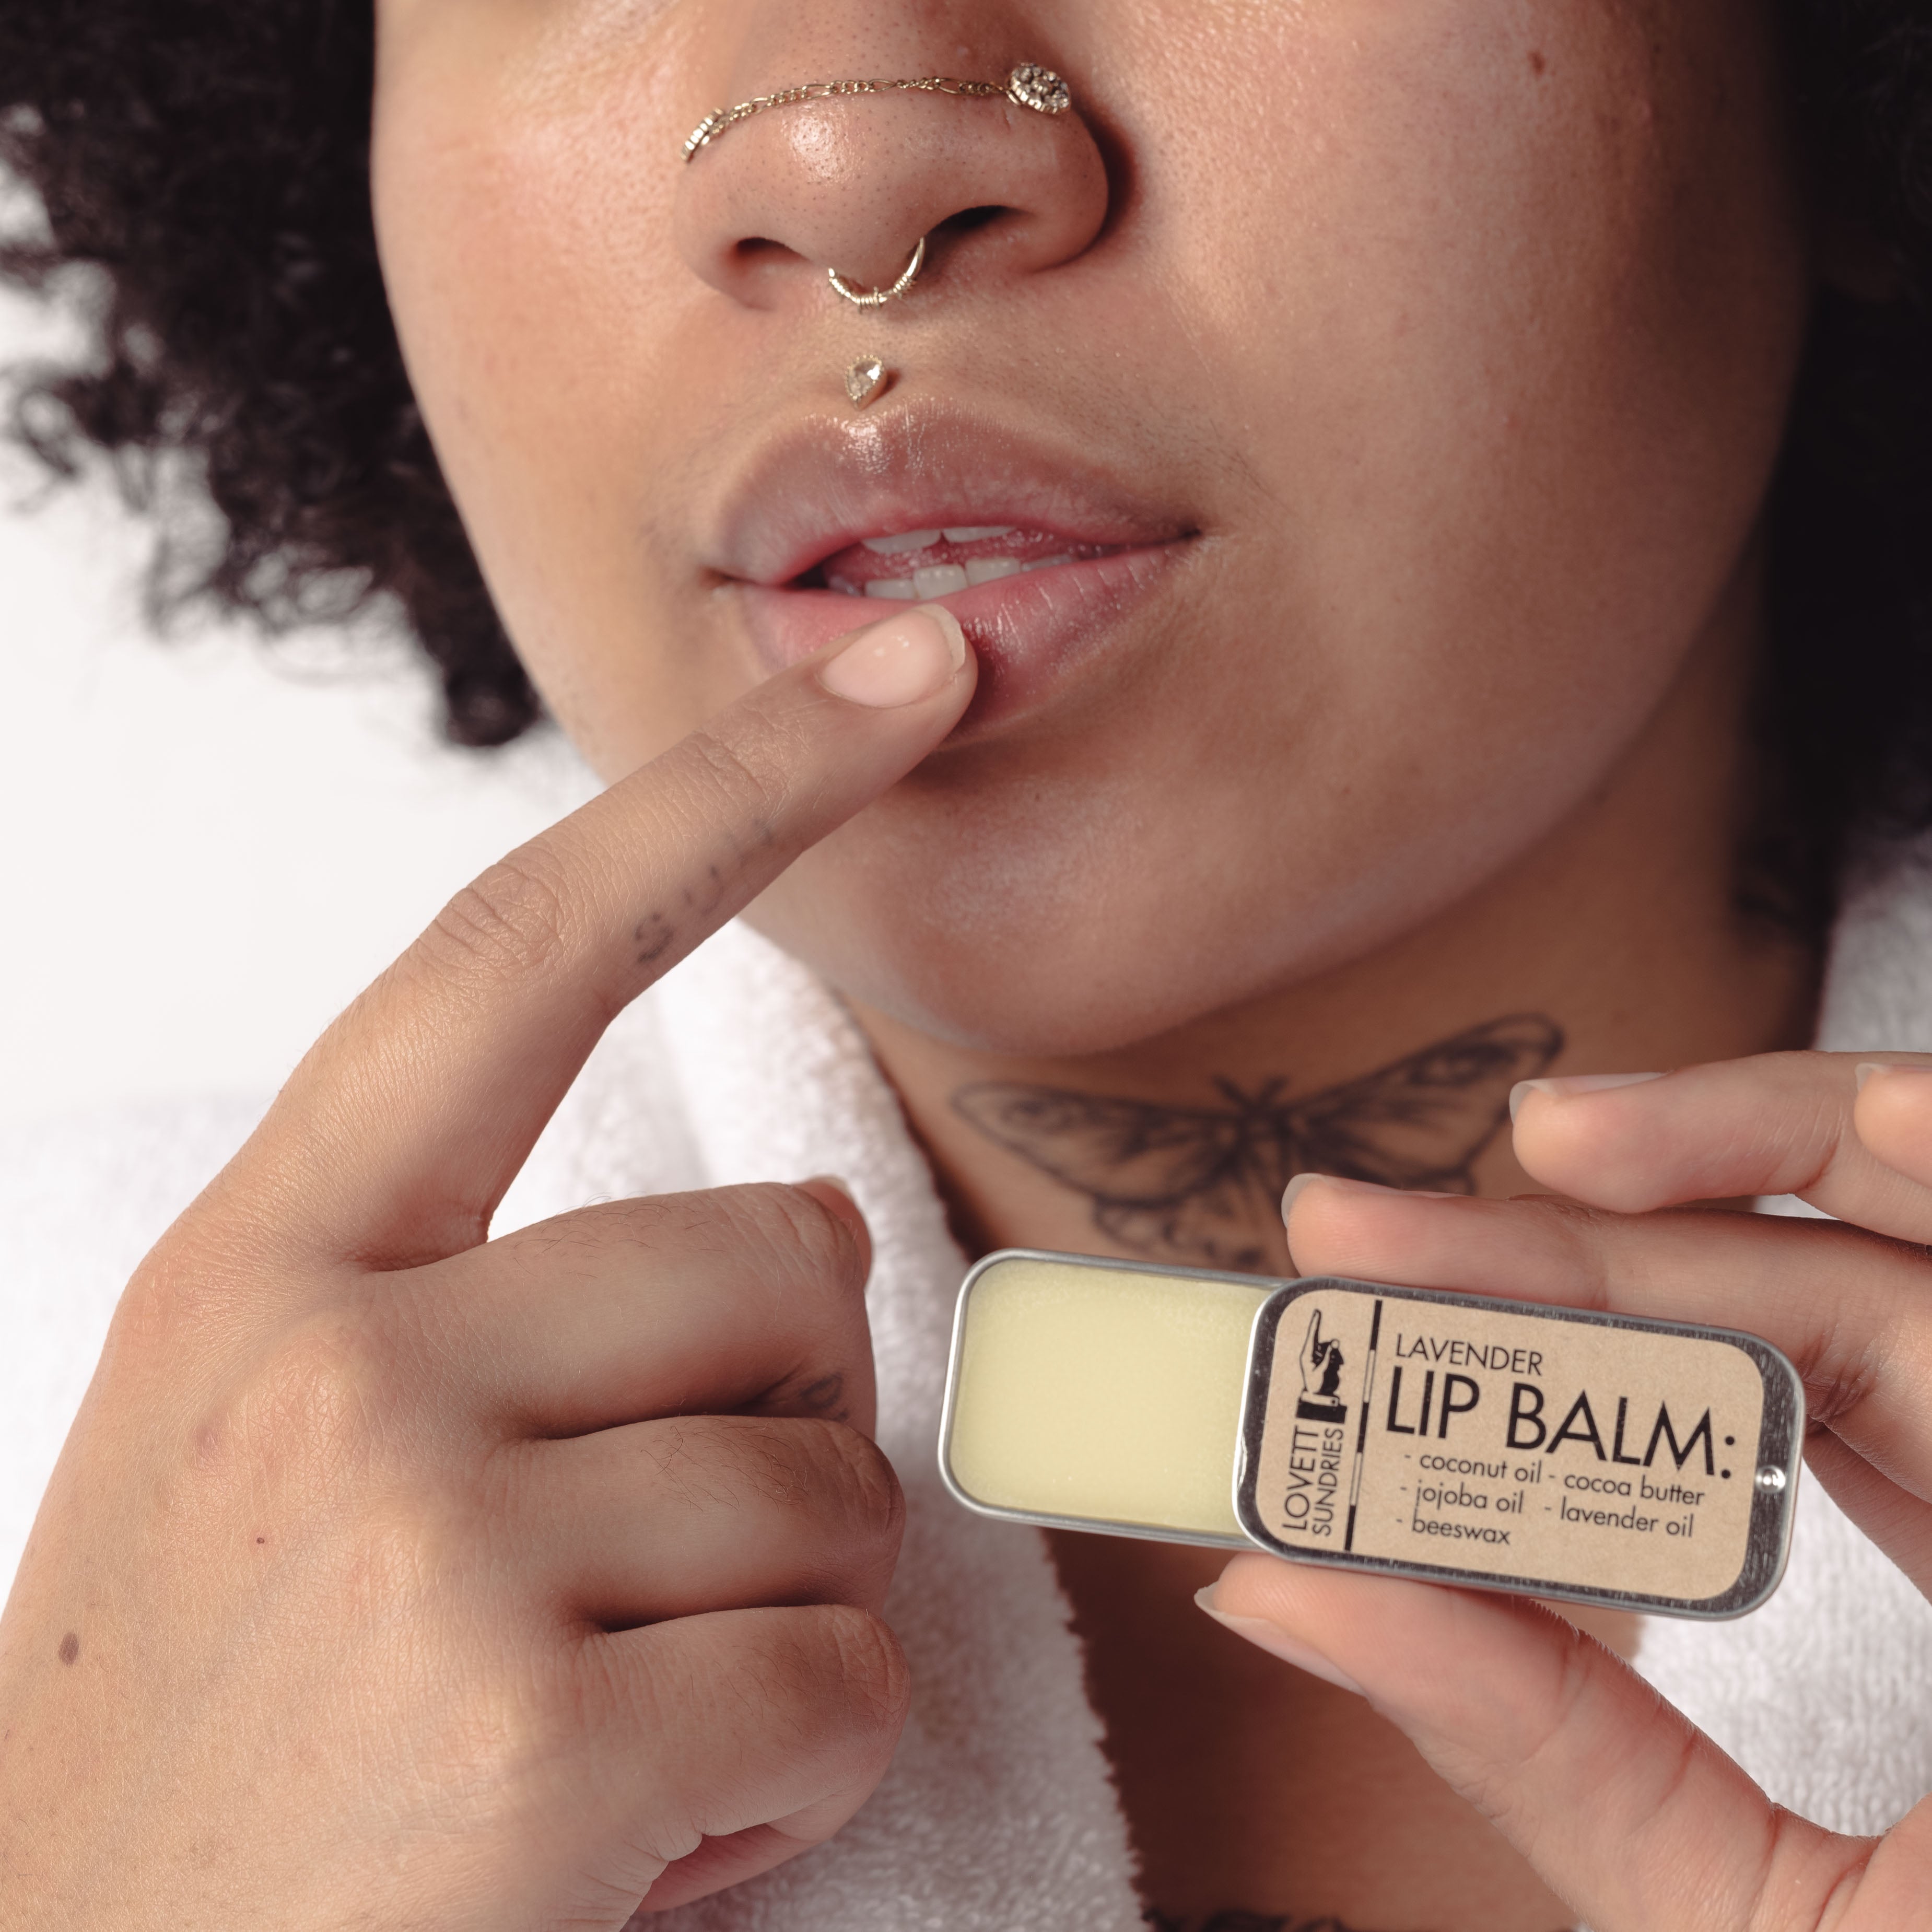 Woman applying lavender All-Natural Lip Balm to her lips.